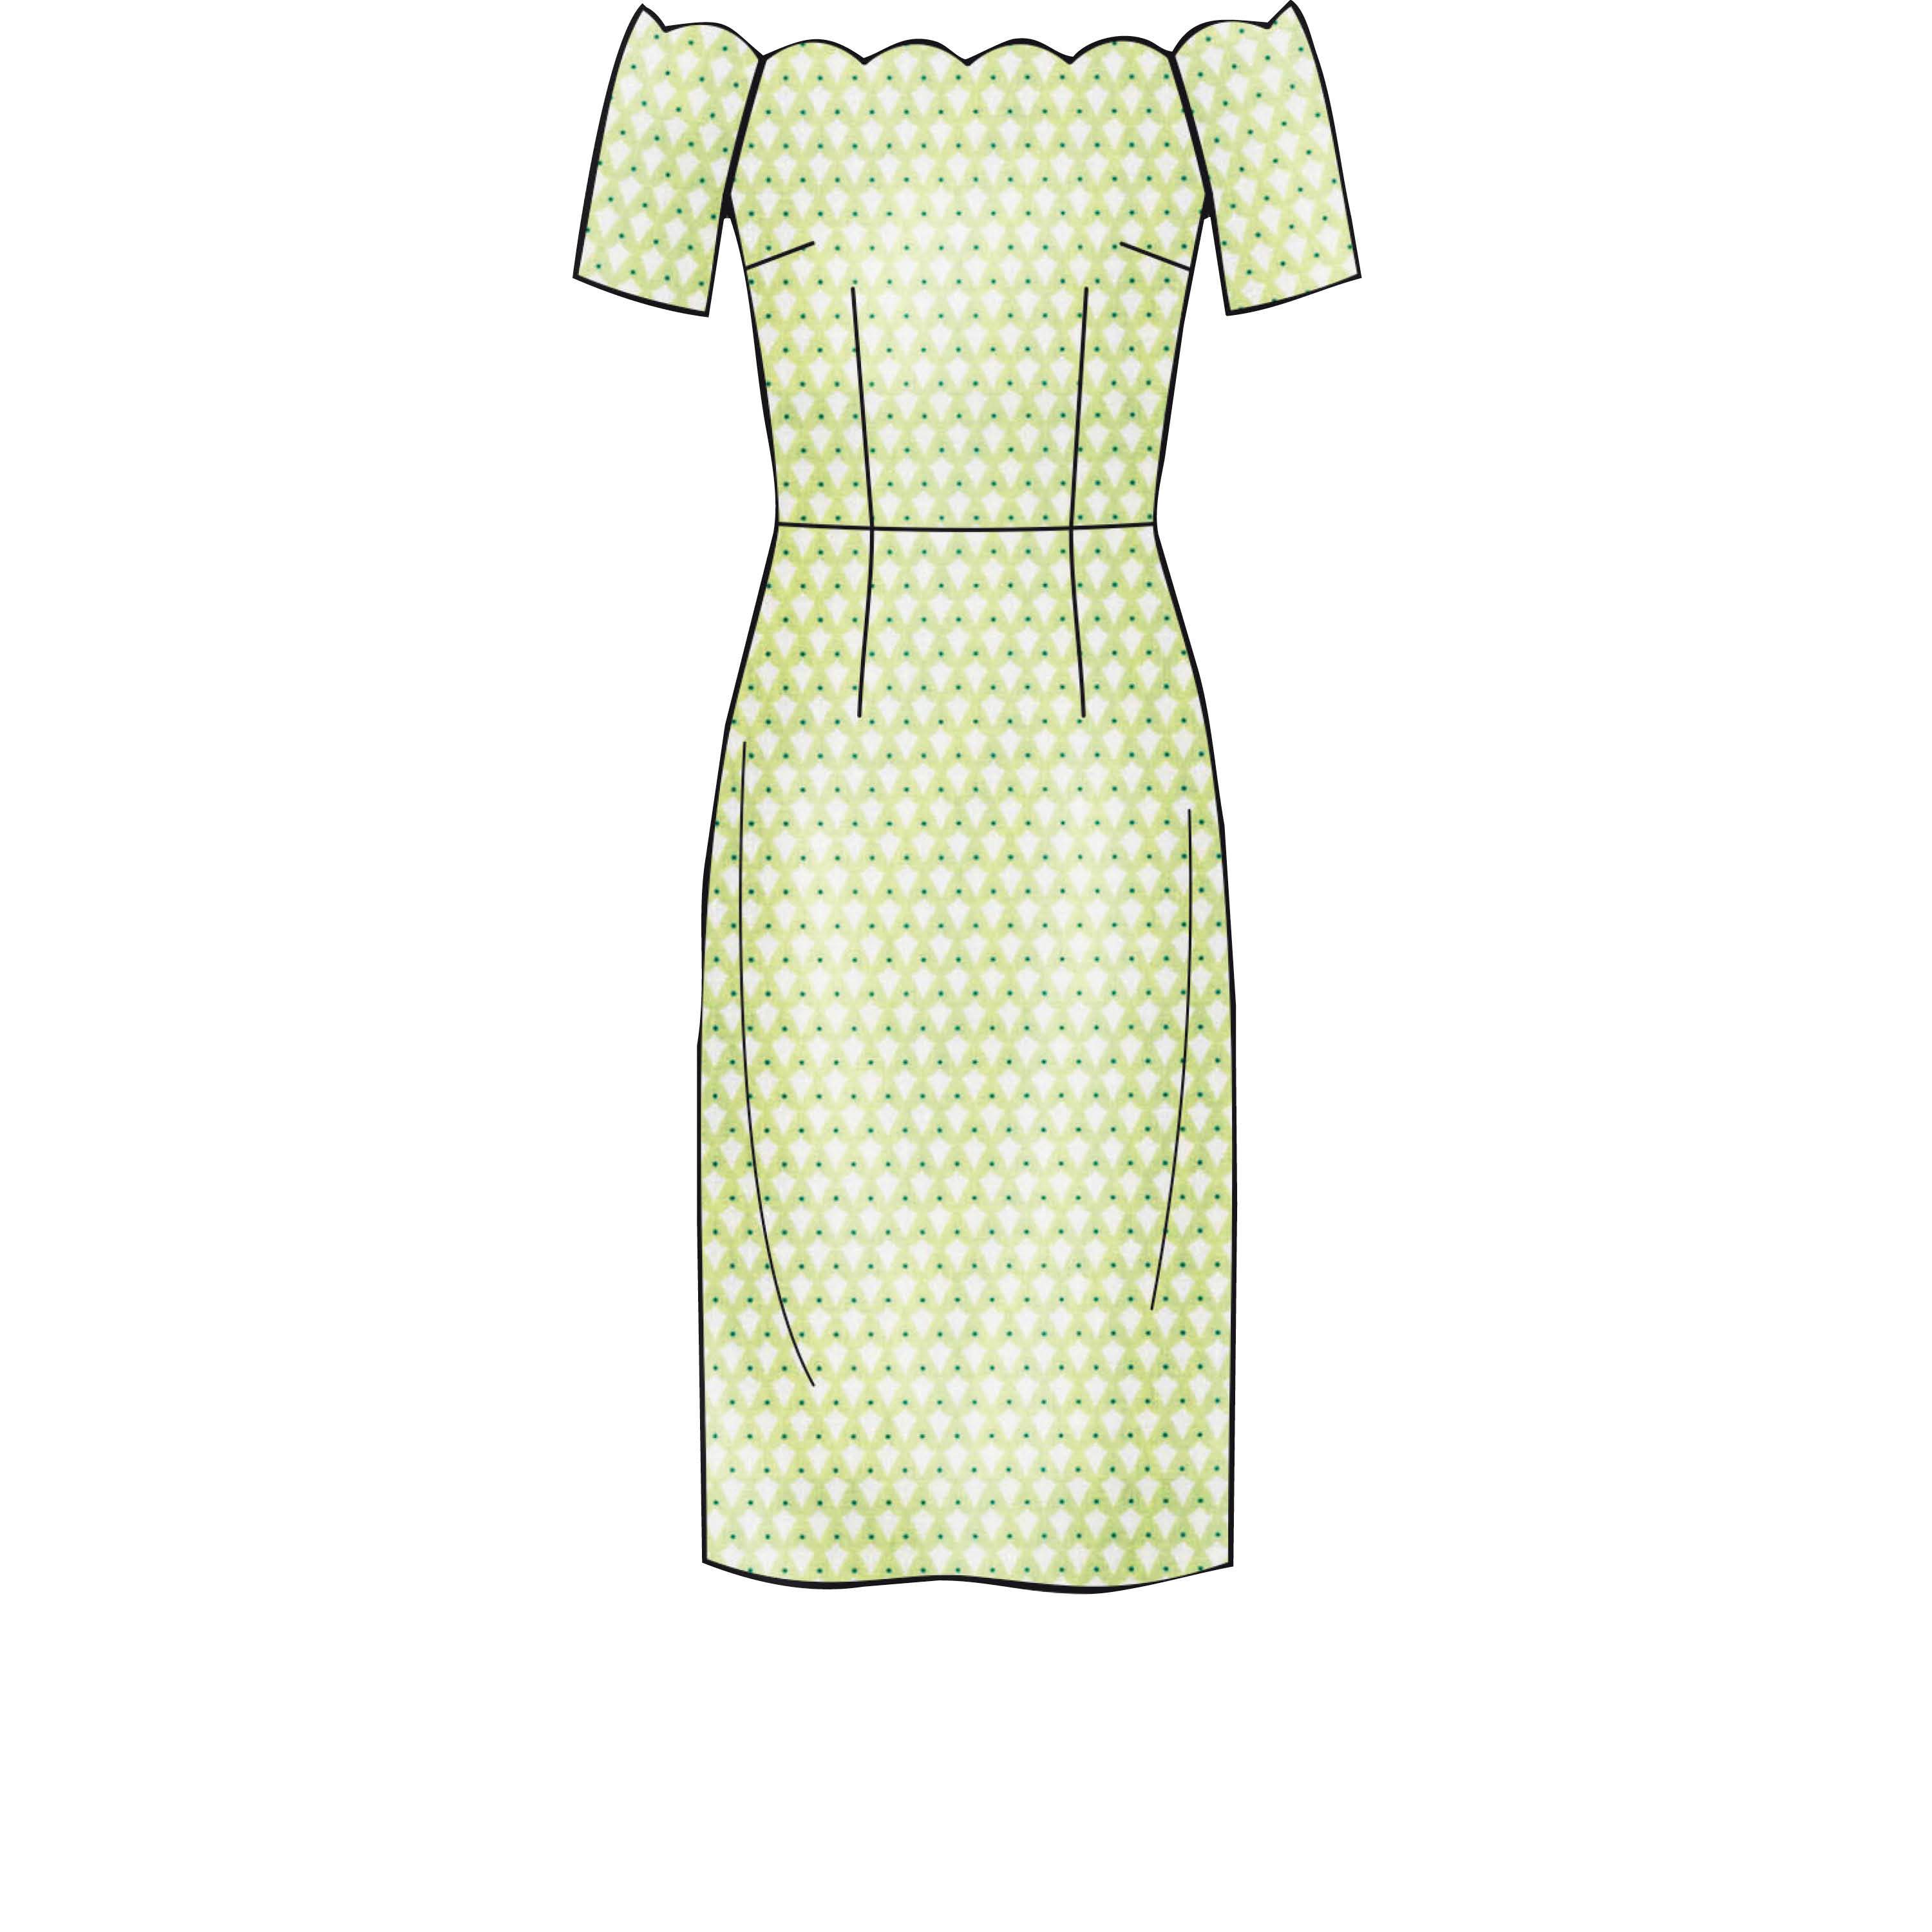 New Look Sewing Pattern 6615 Misses' Dresses — jaycotts.co.uk - Sewing ...